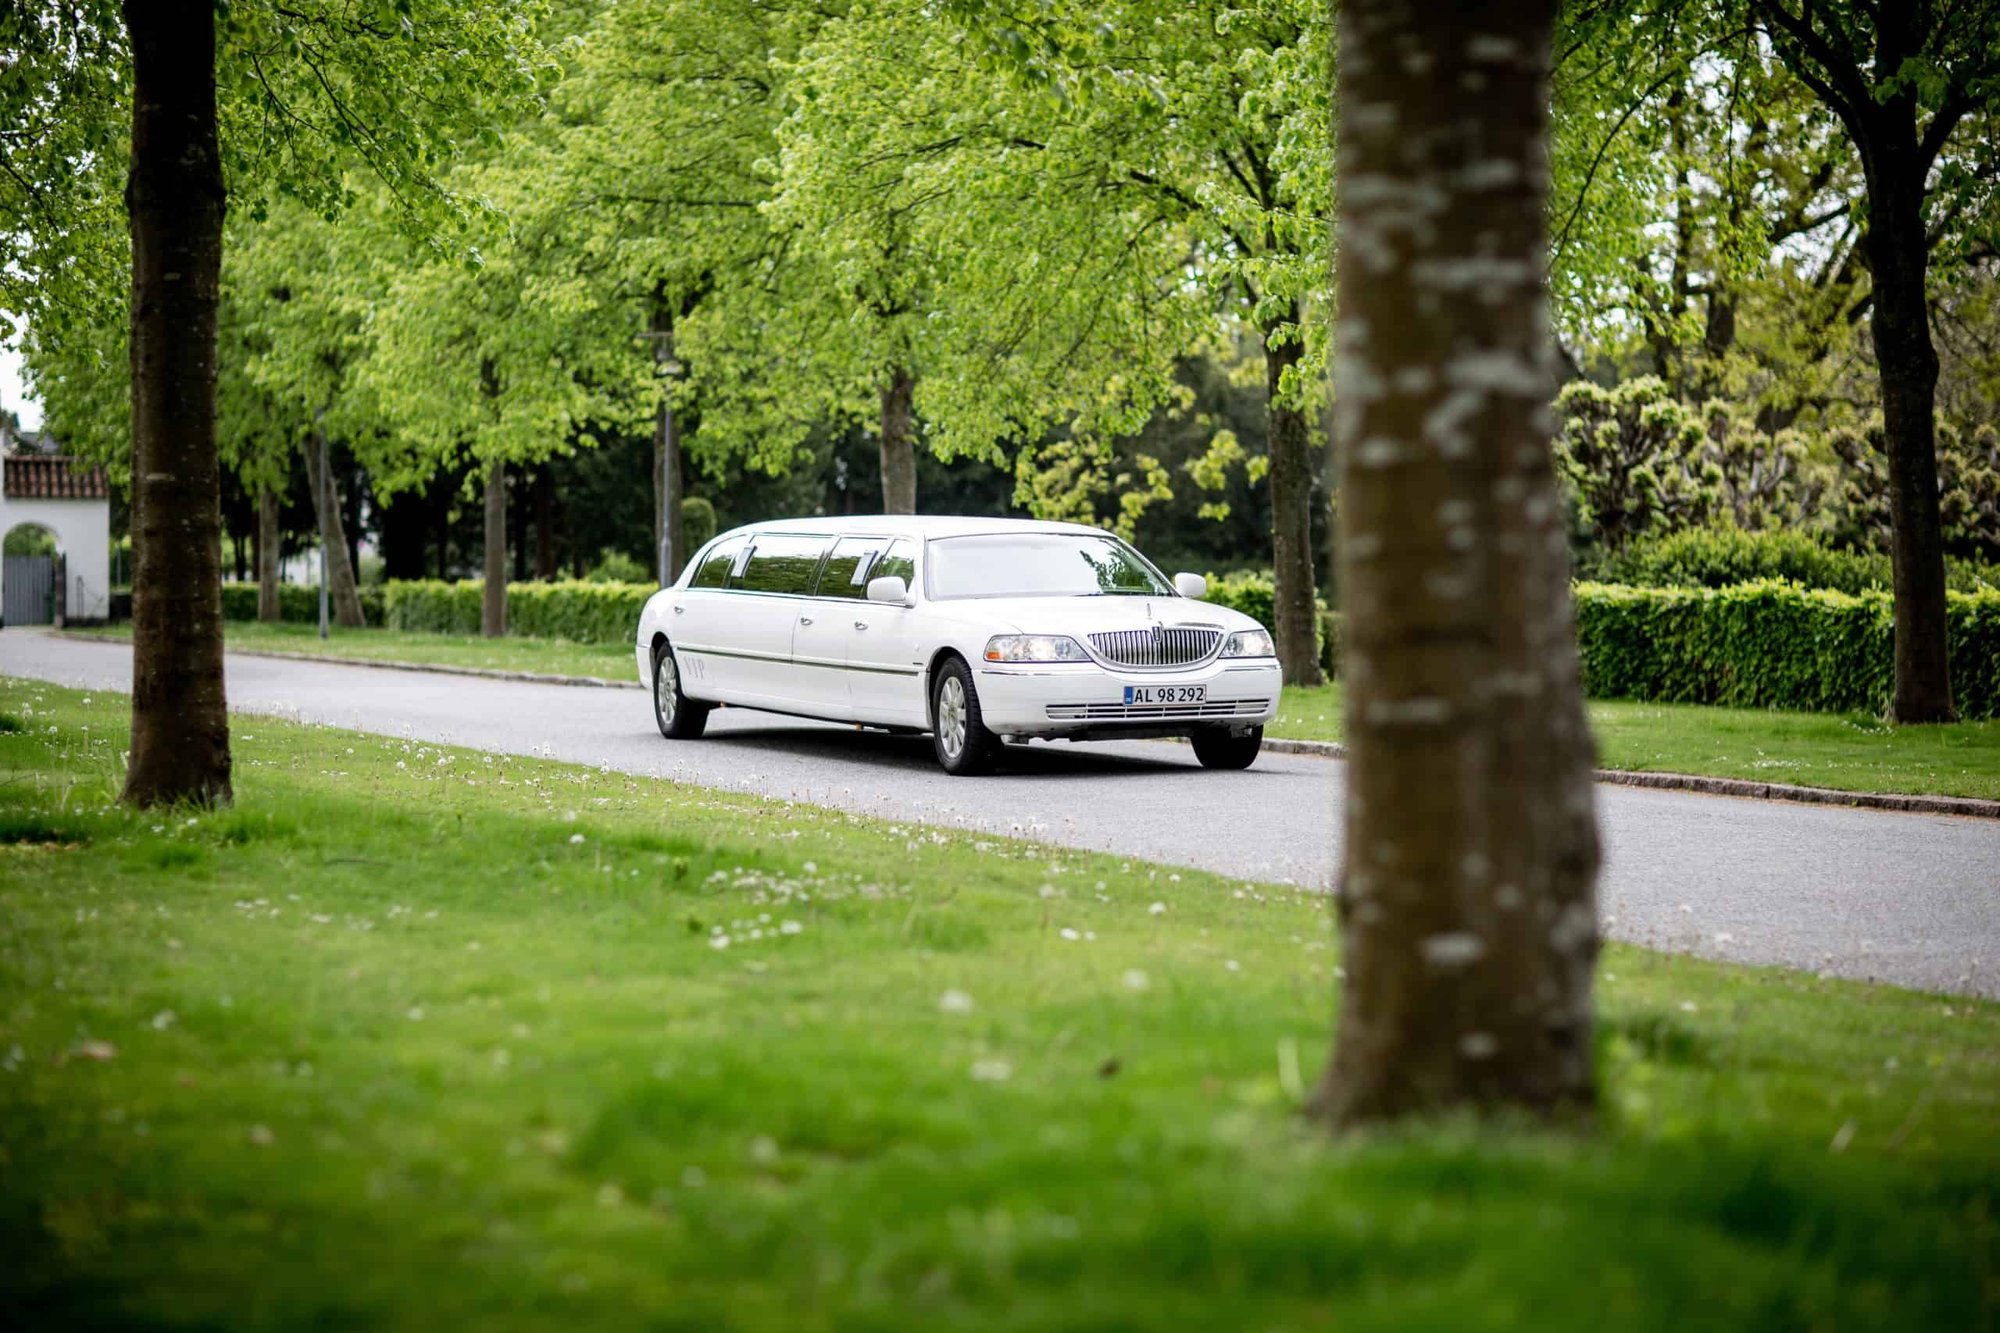 white-limousine-driving-on-road-2504936-scaled-1